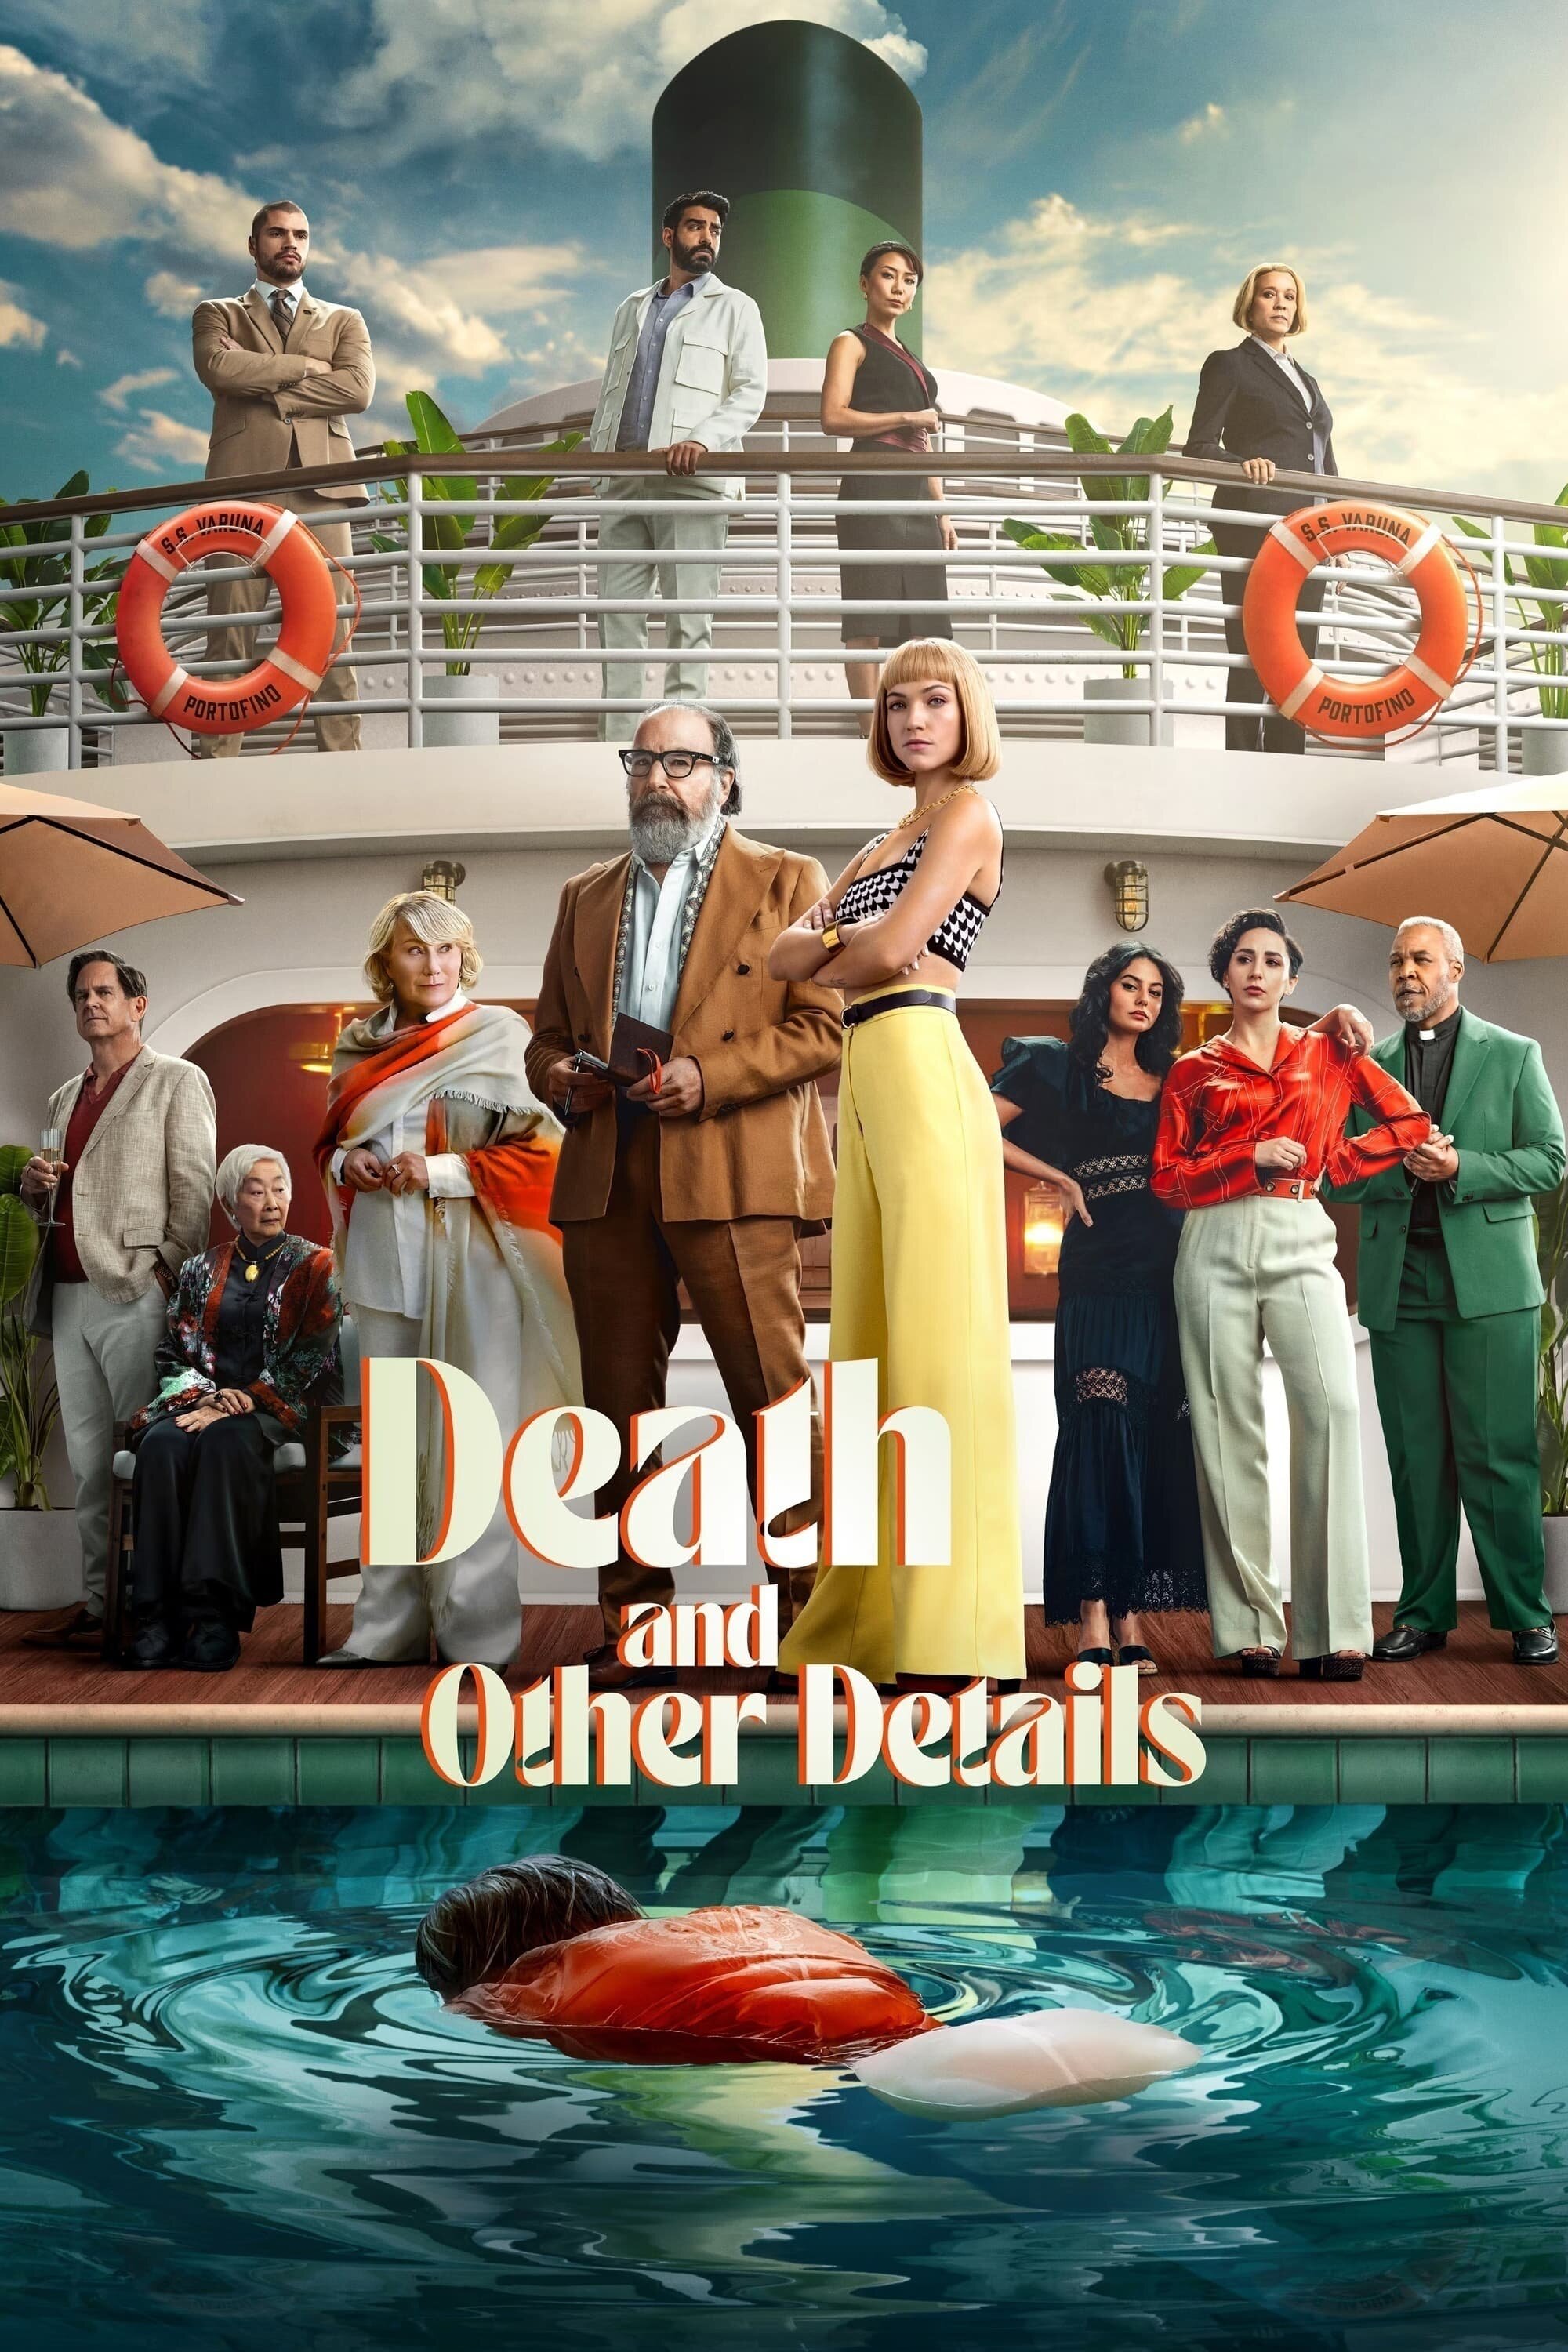 Death and Other Details S01E09 DV HDR 2160p WEB H265-SuccessfulCrab